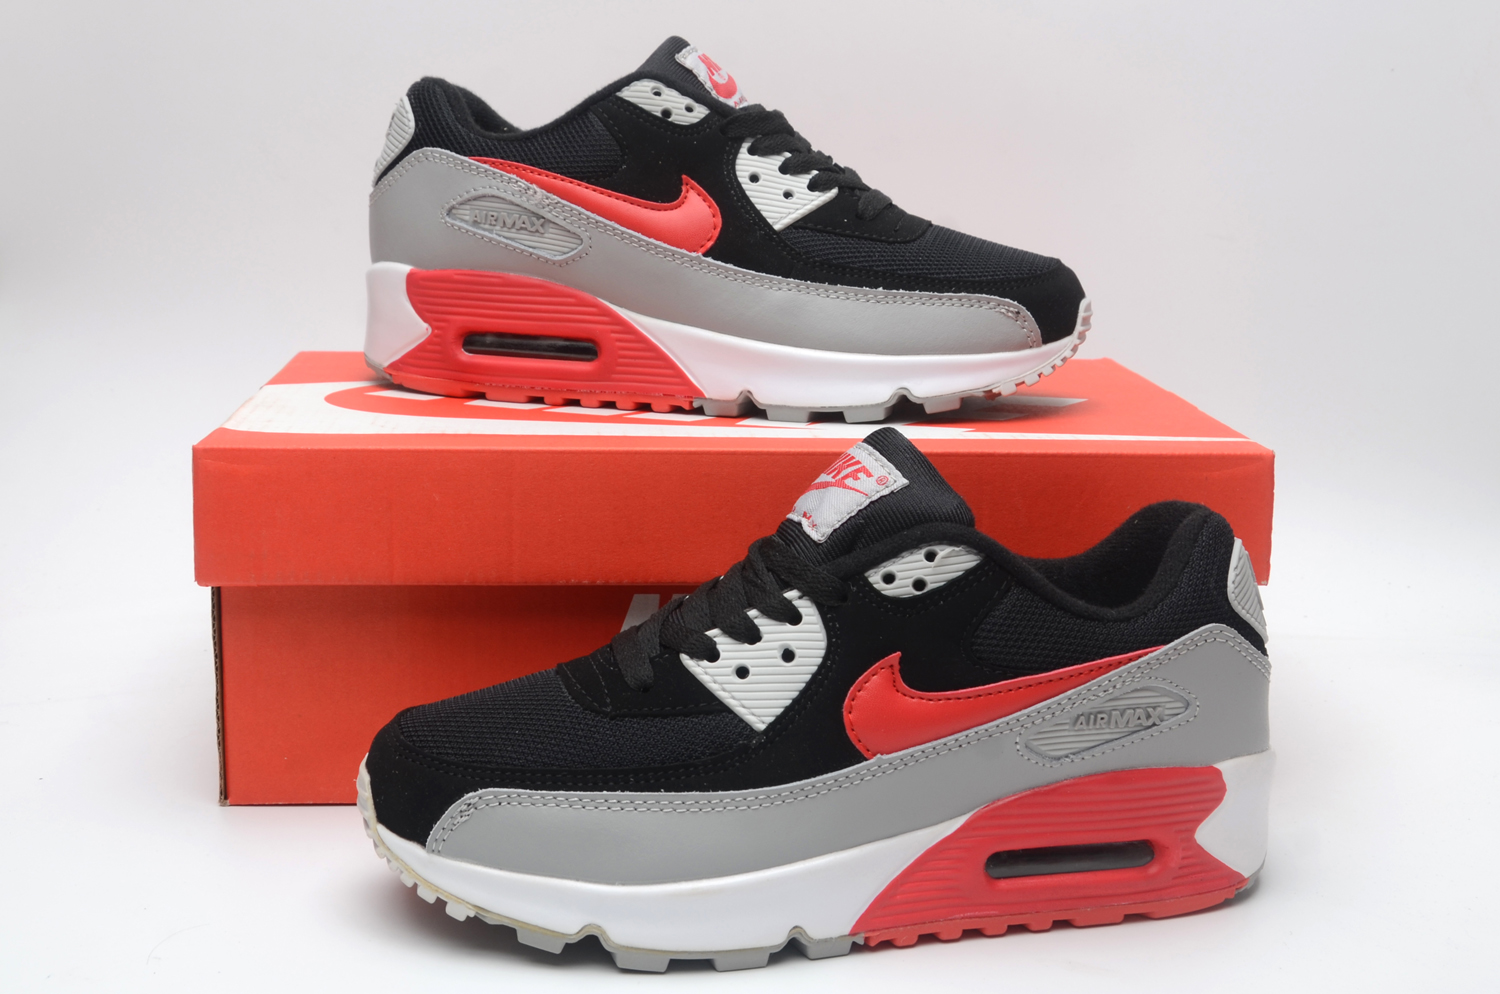 Women's Running weapon Air Max 90 Shoes 037